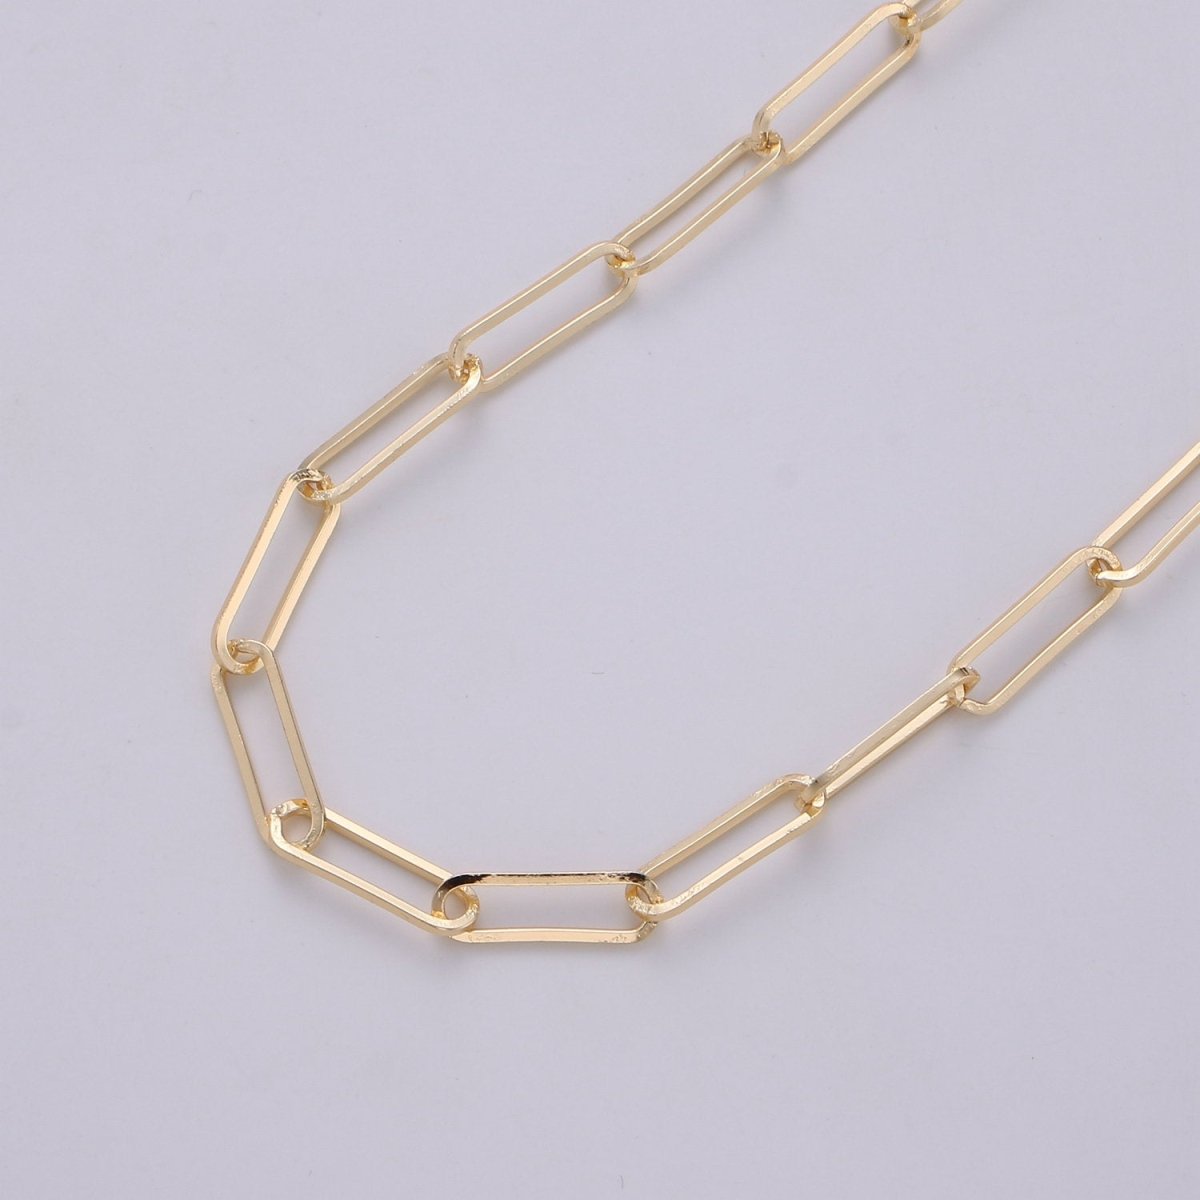 Medium Paperclip Rectangle Cable Chains By Yard in 16K Gold Filled Chain Choker 18mmx5mm, Bracelet, Necklace Chain supplies | ROLL-252 Clearance Pricing - DLUXCA